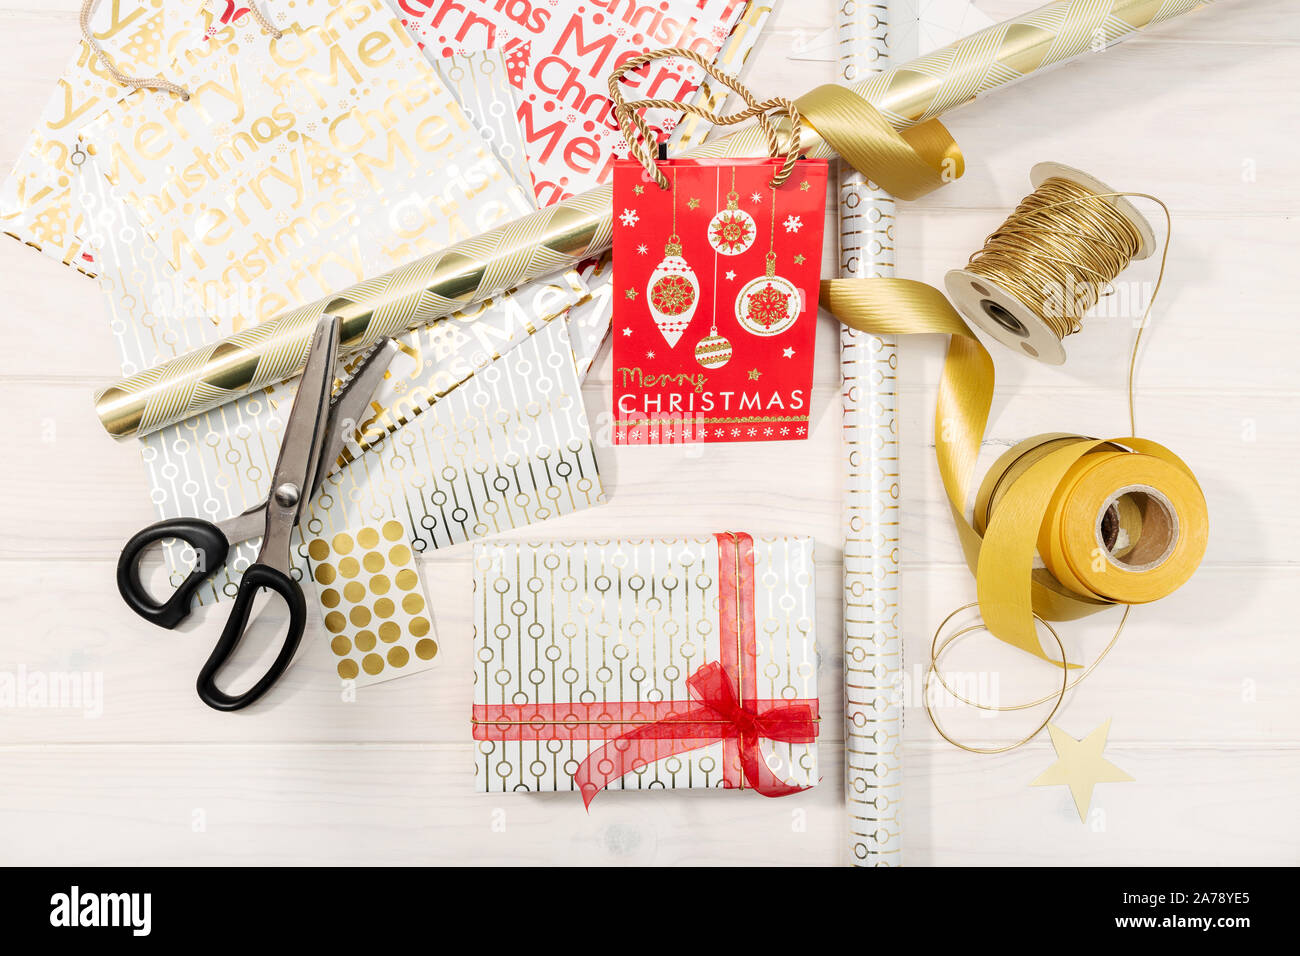 https://c8.alamy.com/comp/2A78YE5/flat-lay-of-christmas-gifts-decoration-paper-ribbons-and-scissors-christmas-gift-concept-top-view-2A78YE5.jpg